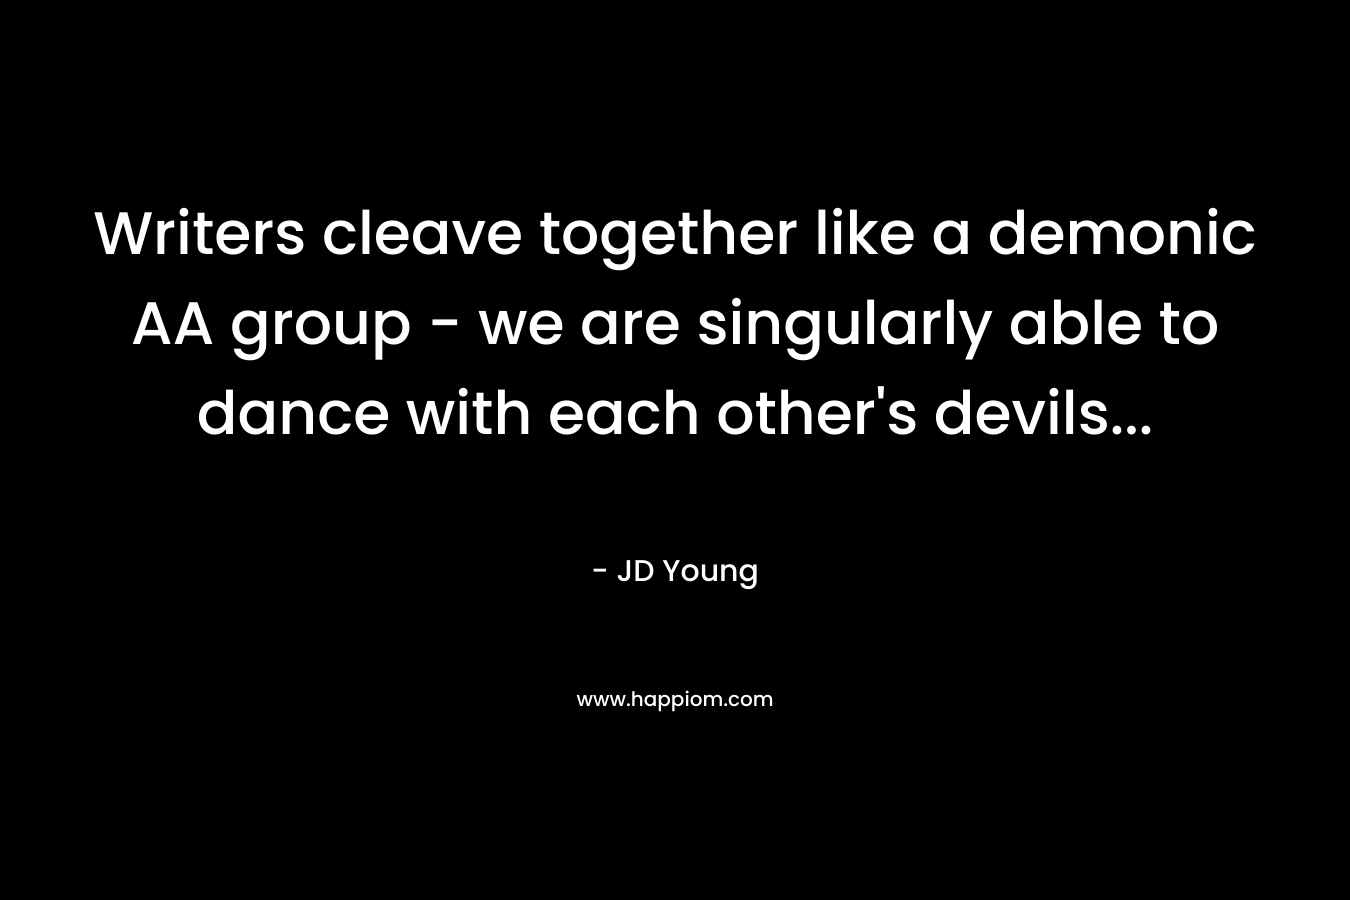 Writers cleave together like a demonic AA group - we are singularly able to dance with each other's devils...